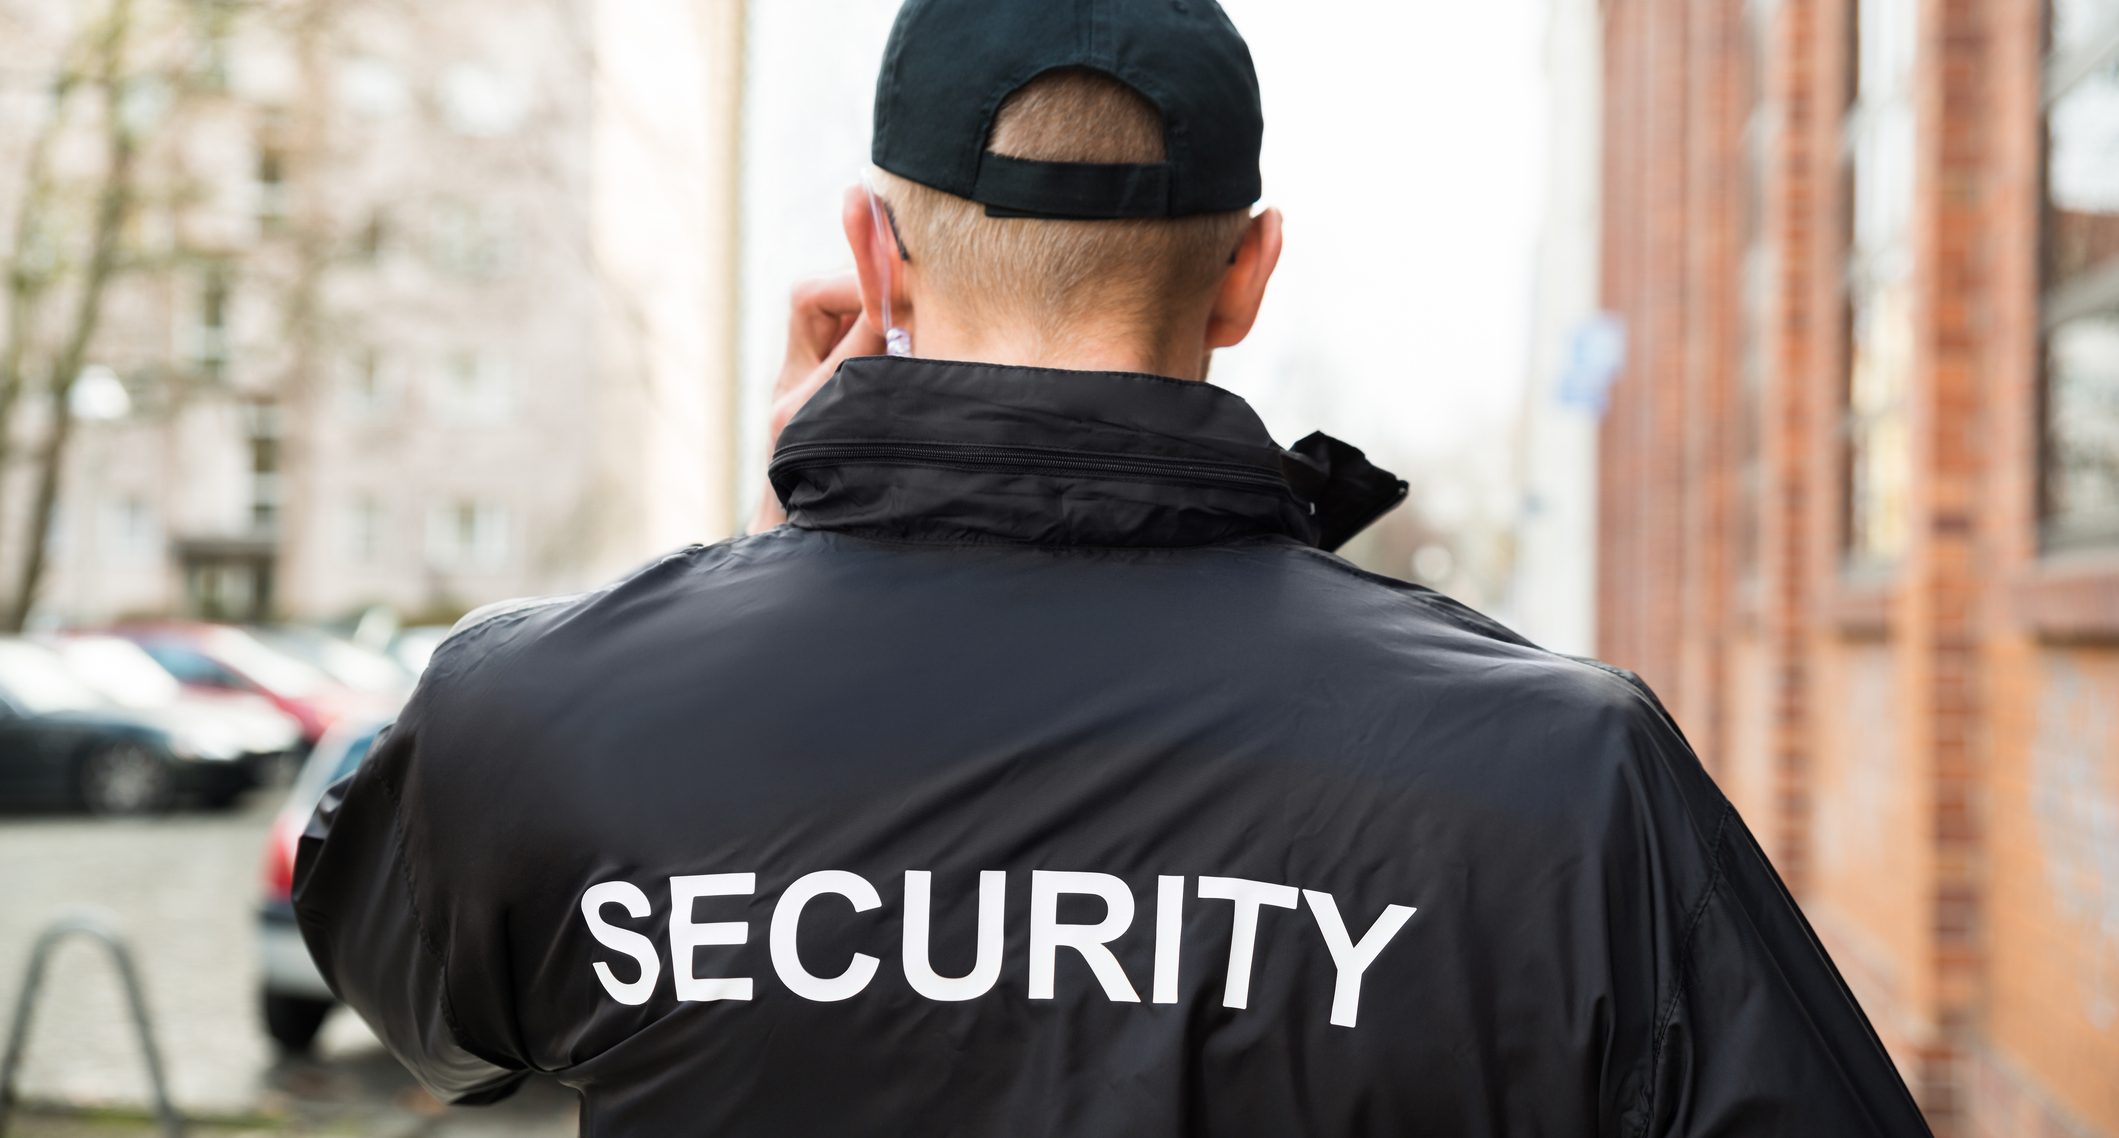 Security and Protection Services